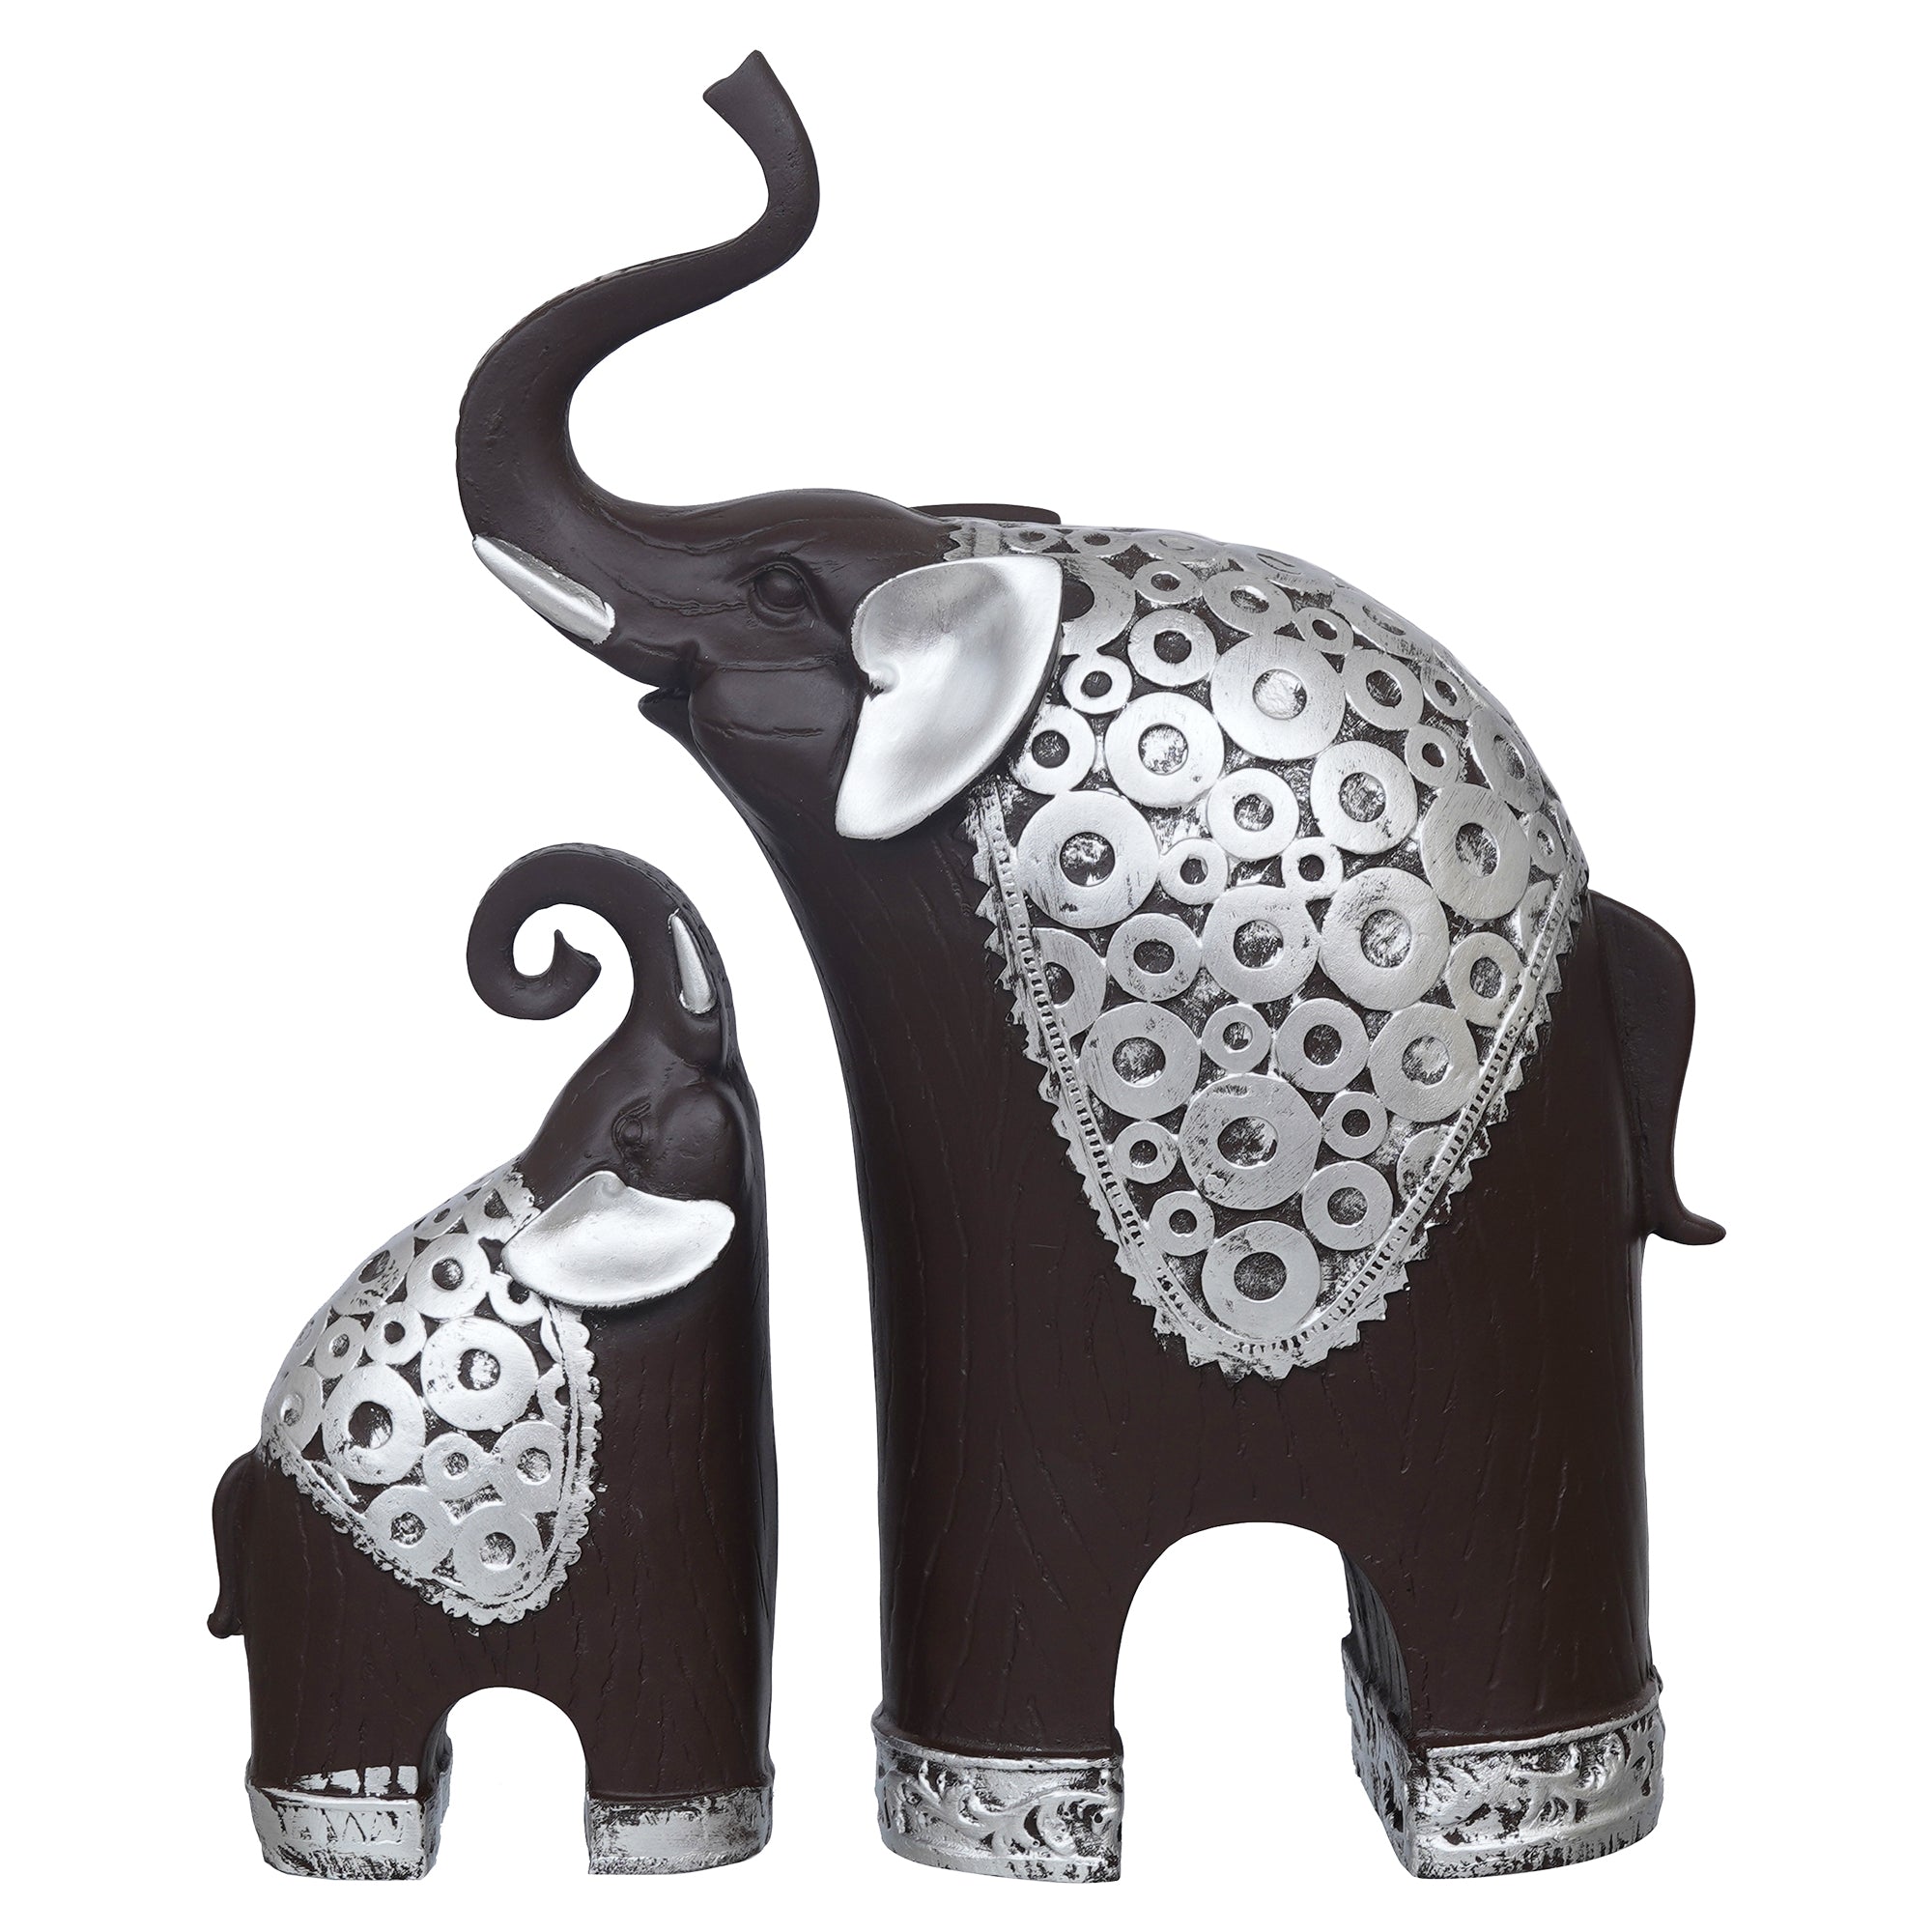 eCraftIndia Set Of 2 Black Silver Polyresin Trunk Up Elephant Statues Animal Figurines Showpieces 8